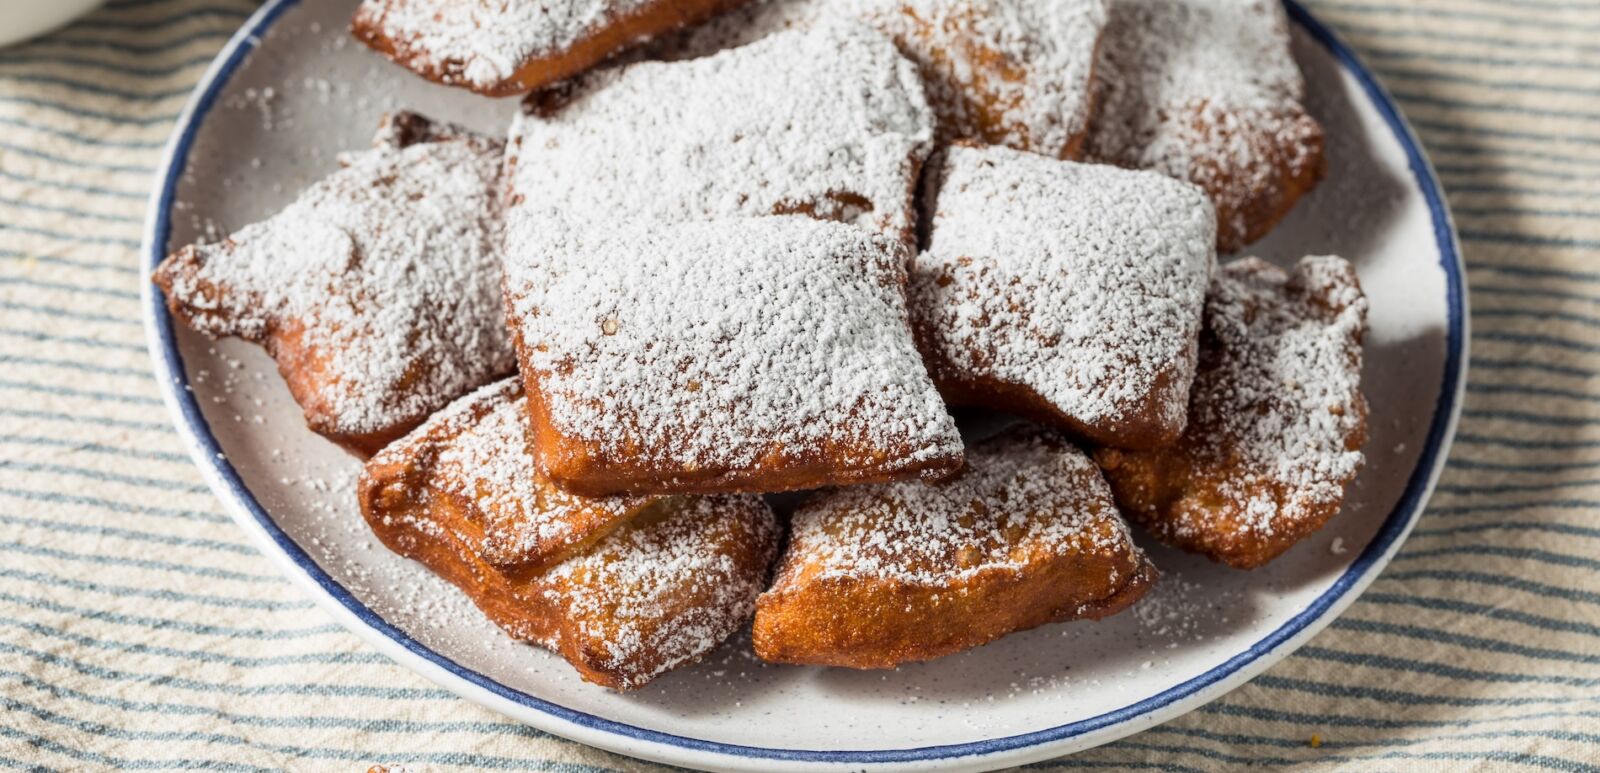 Homemade New Orleans French beignets. Photo via Shutterstock.